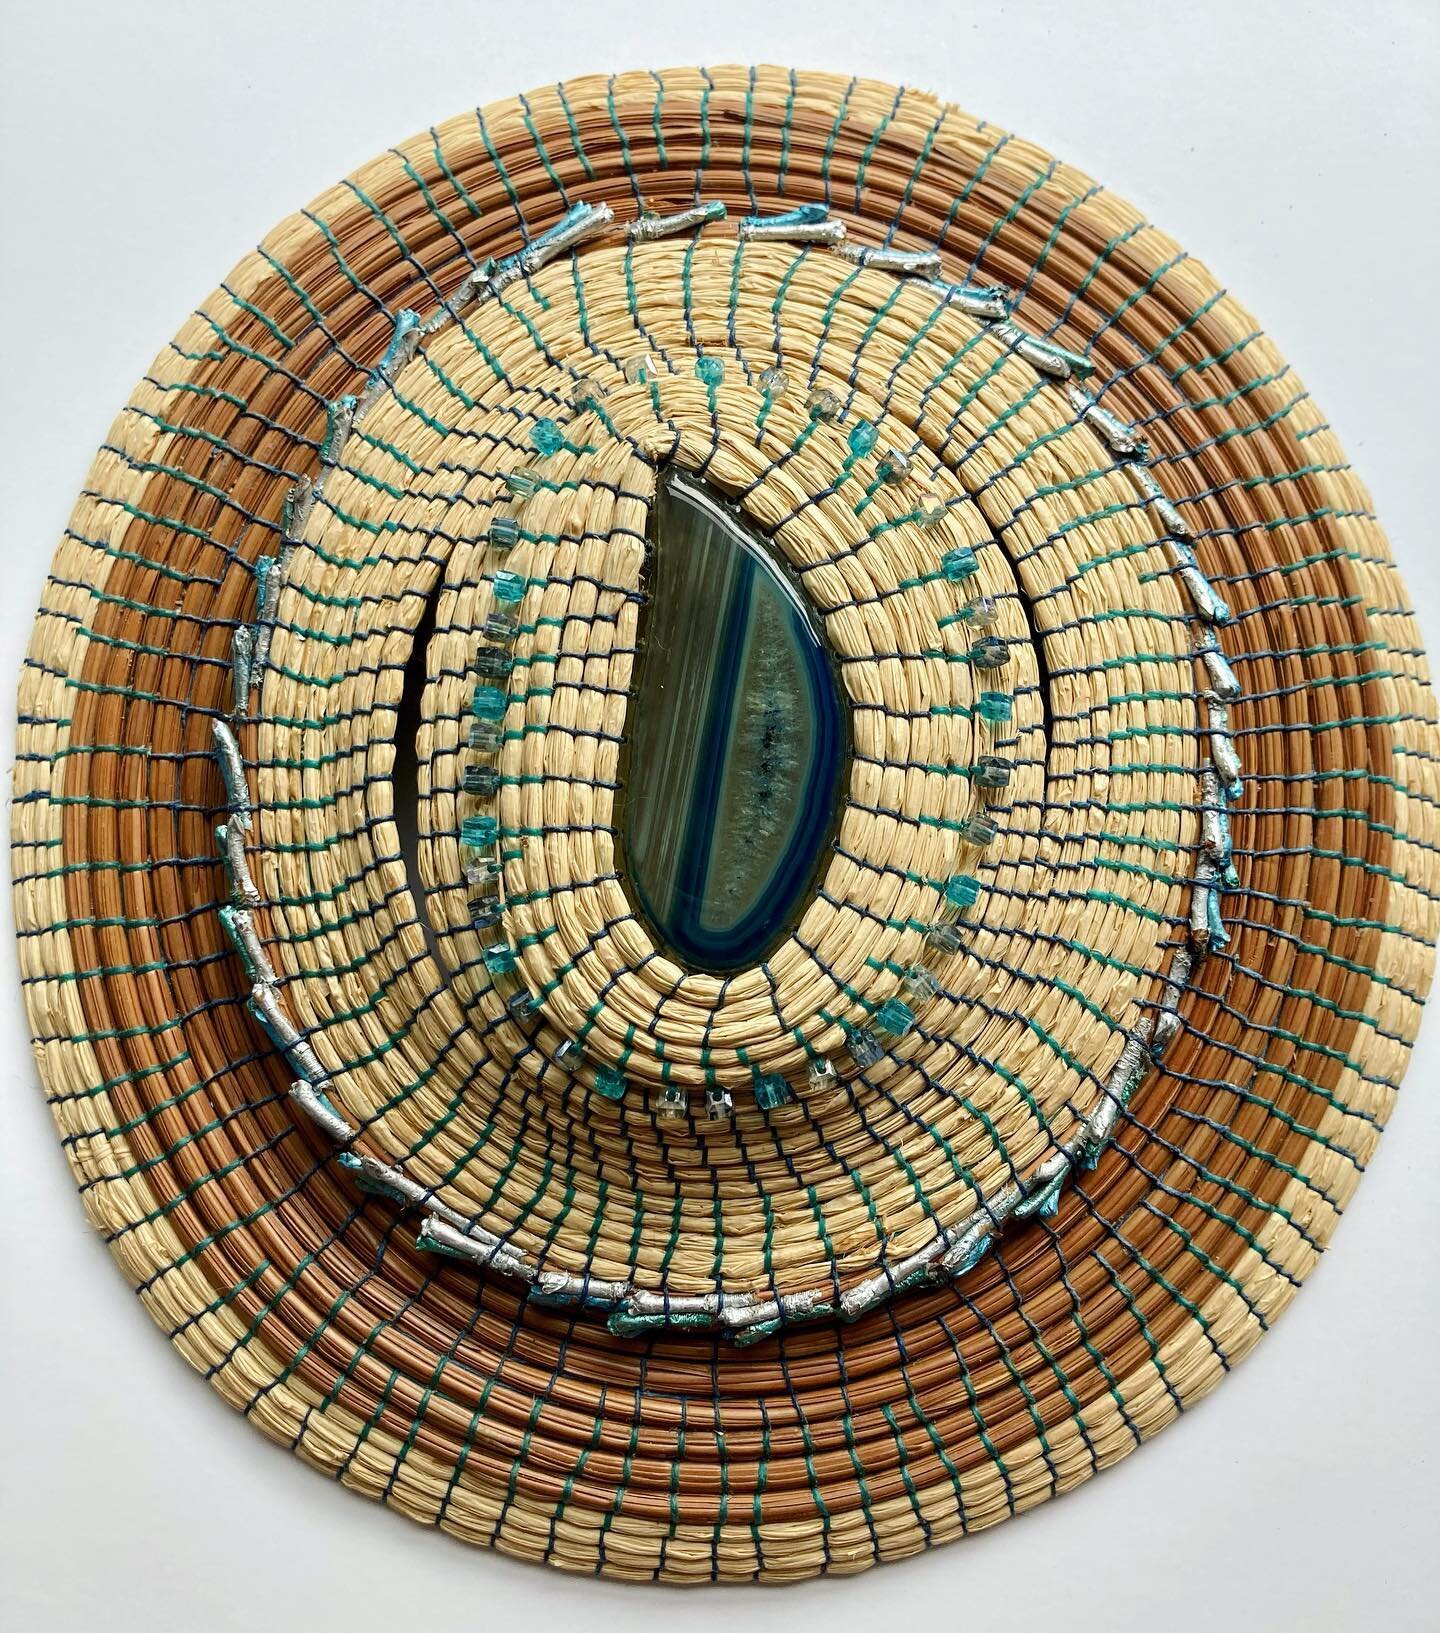 Finished!! I&rsquo;m loving the contrasting color of the pine needles and raffia in the piece. 

Blue agate stone center, raffia, pine needles, painted pine needle caps and glass beads

#baskets #basketry #basketryartist #basketryart #naturalbasketry